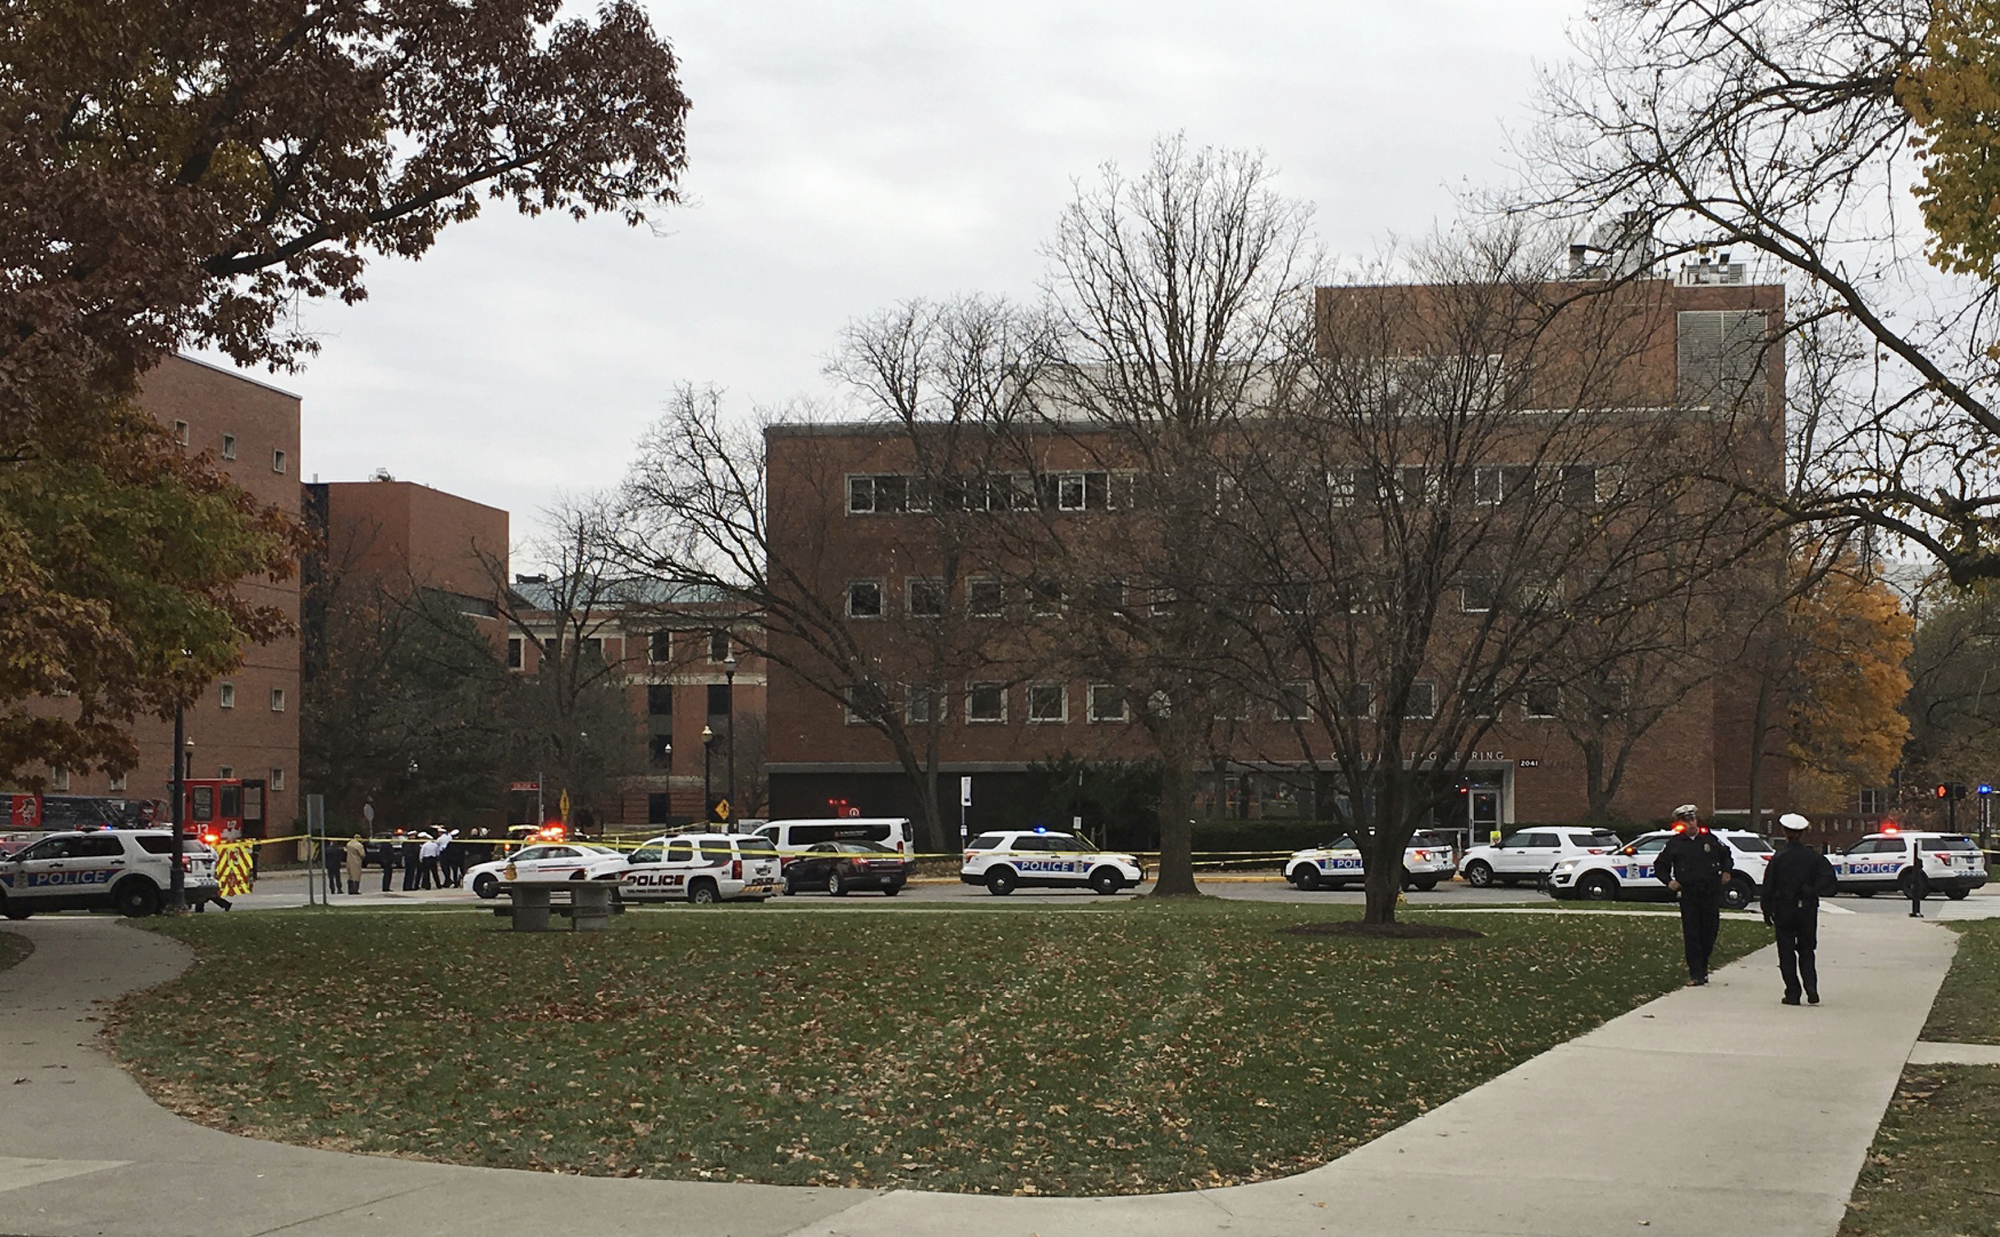 PHOTO: Police respond to reports of an active shooter on campus at Ohio State University on Monday, Nov. 28, 2016, in Columbus, Ohio.